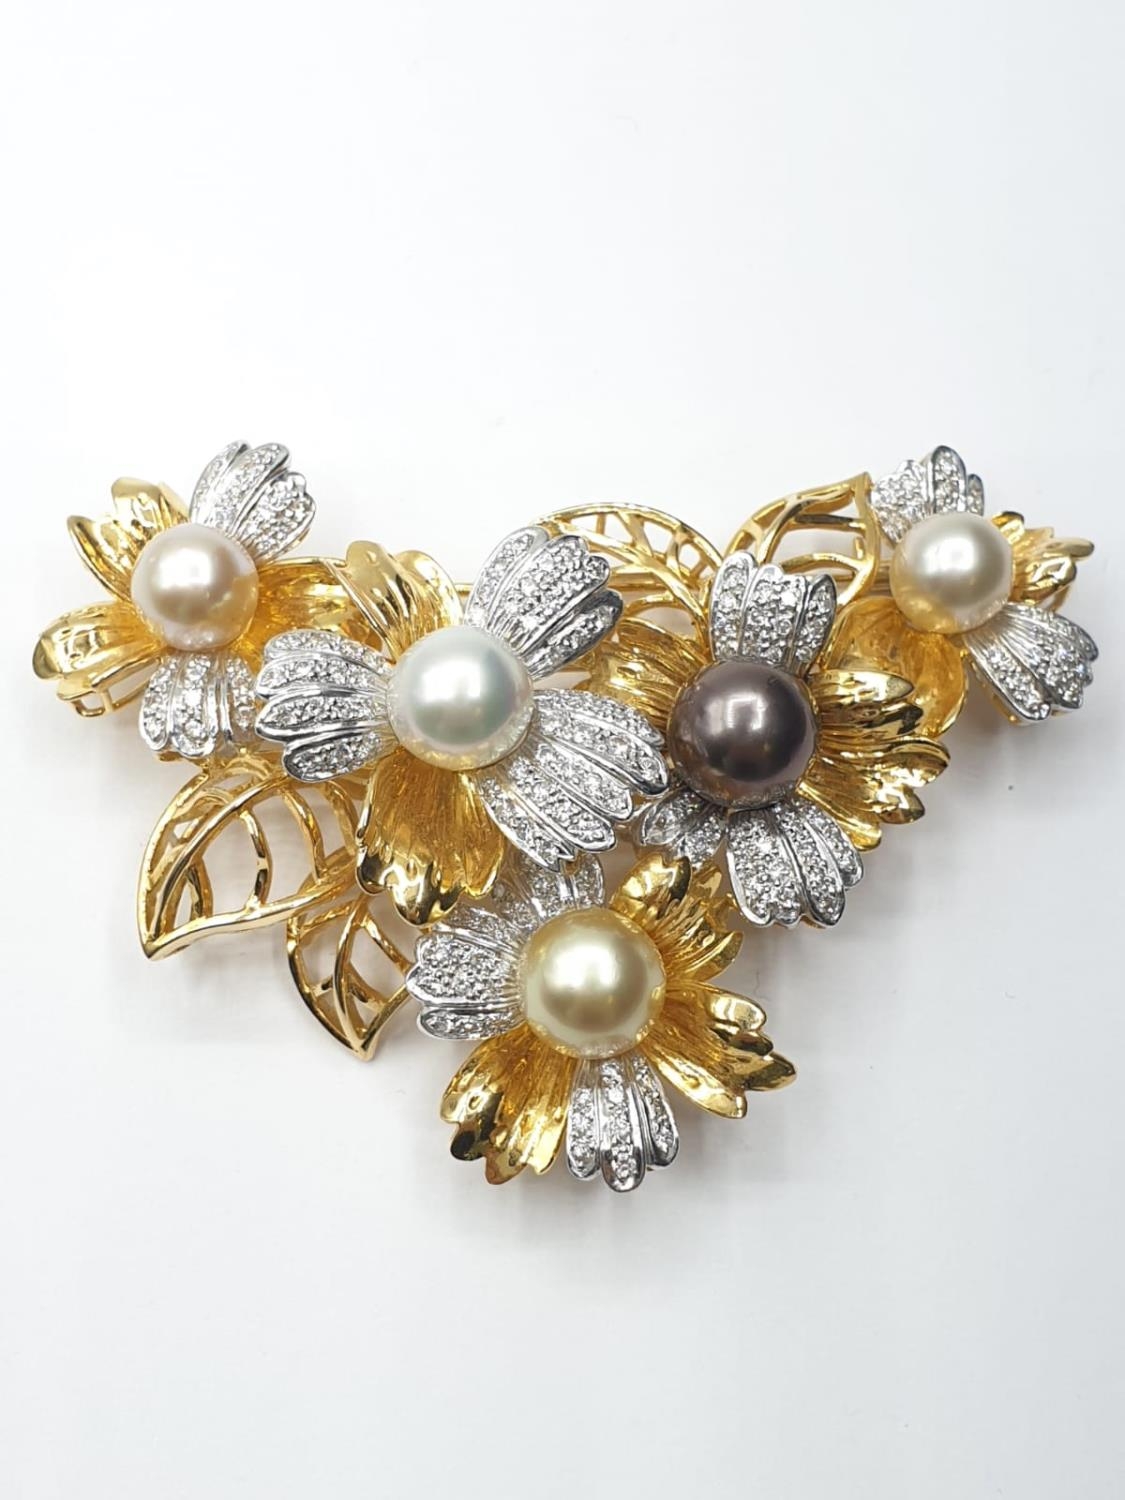 Large Antique 18ct gold brooch set with 3 colour south sea pearls (approx 9-12mm in size) and